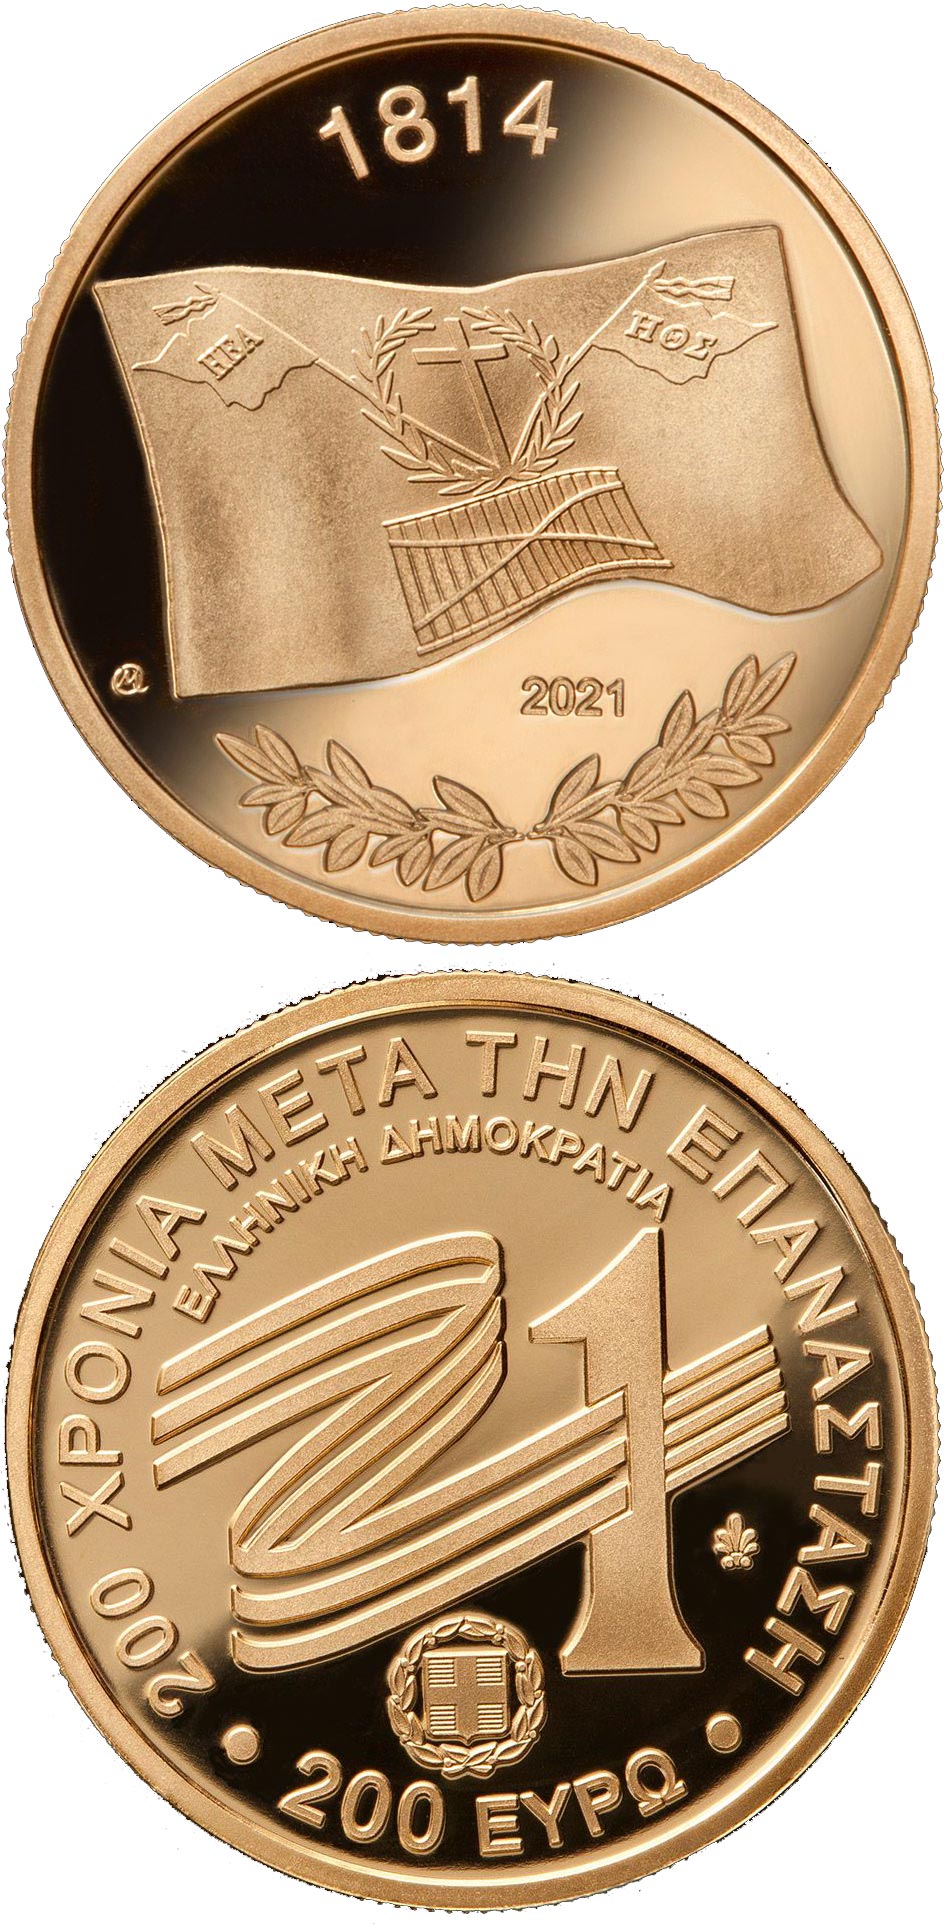 Image of 200 euro coin - The Flags of Greece -
The Flag of the Friendly Society
(Philike Etaireia) | Greece 2021.  The Gold coin is of Proof quality.